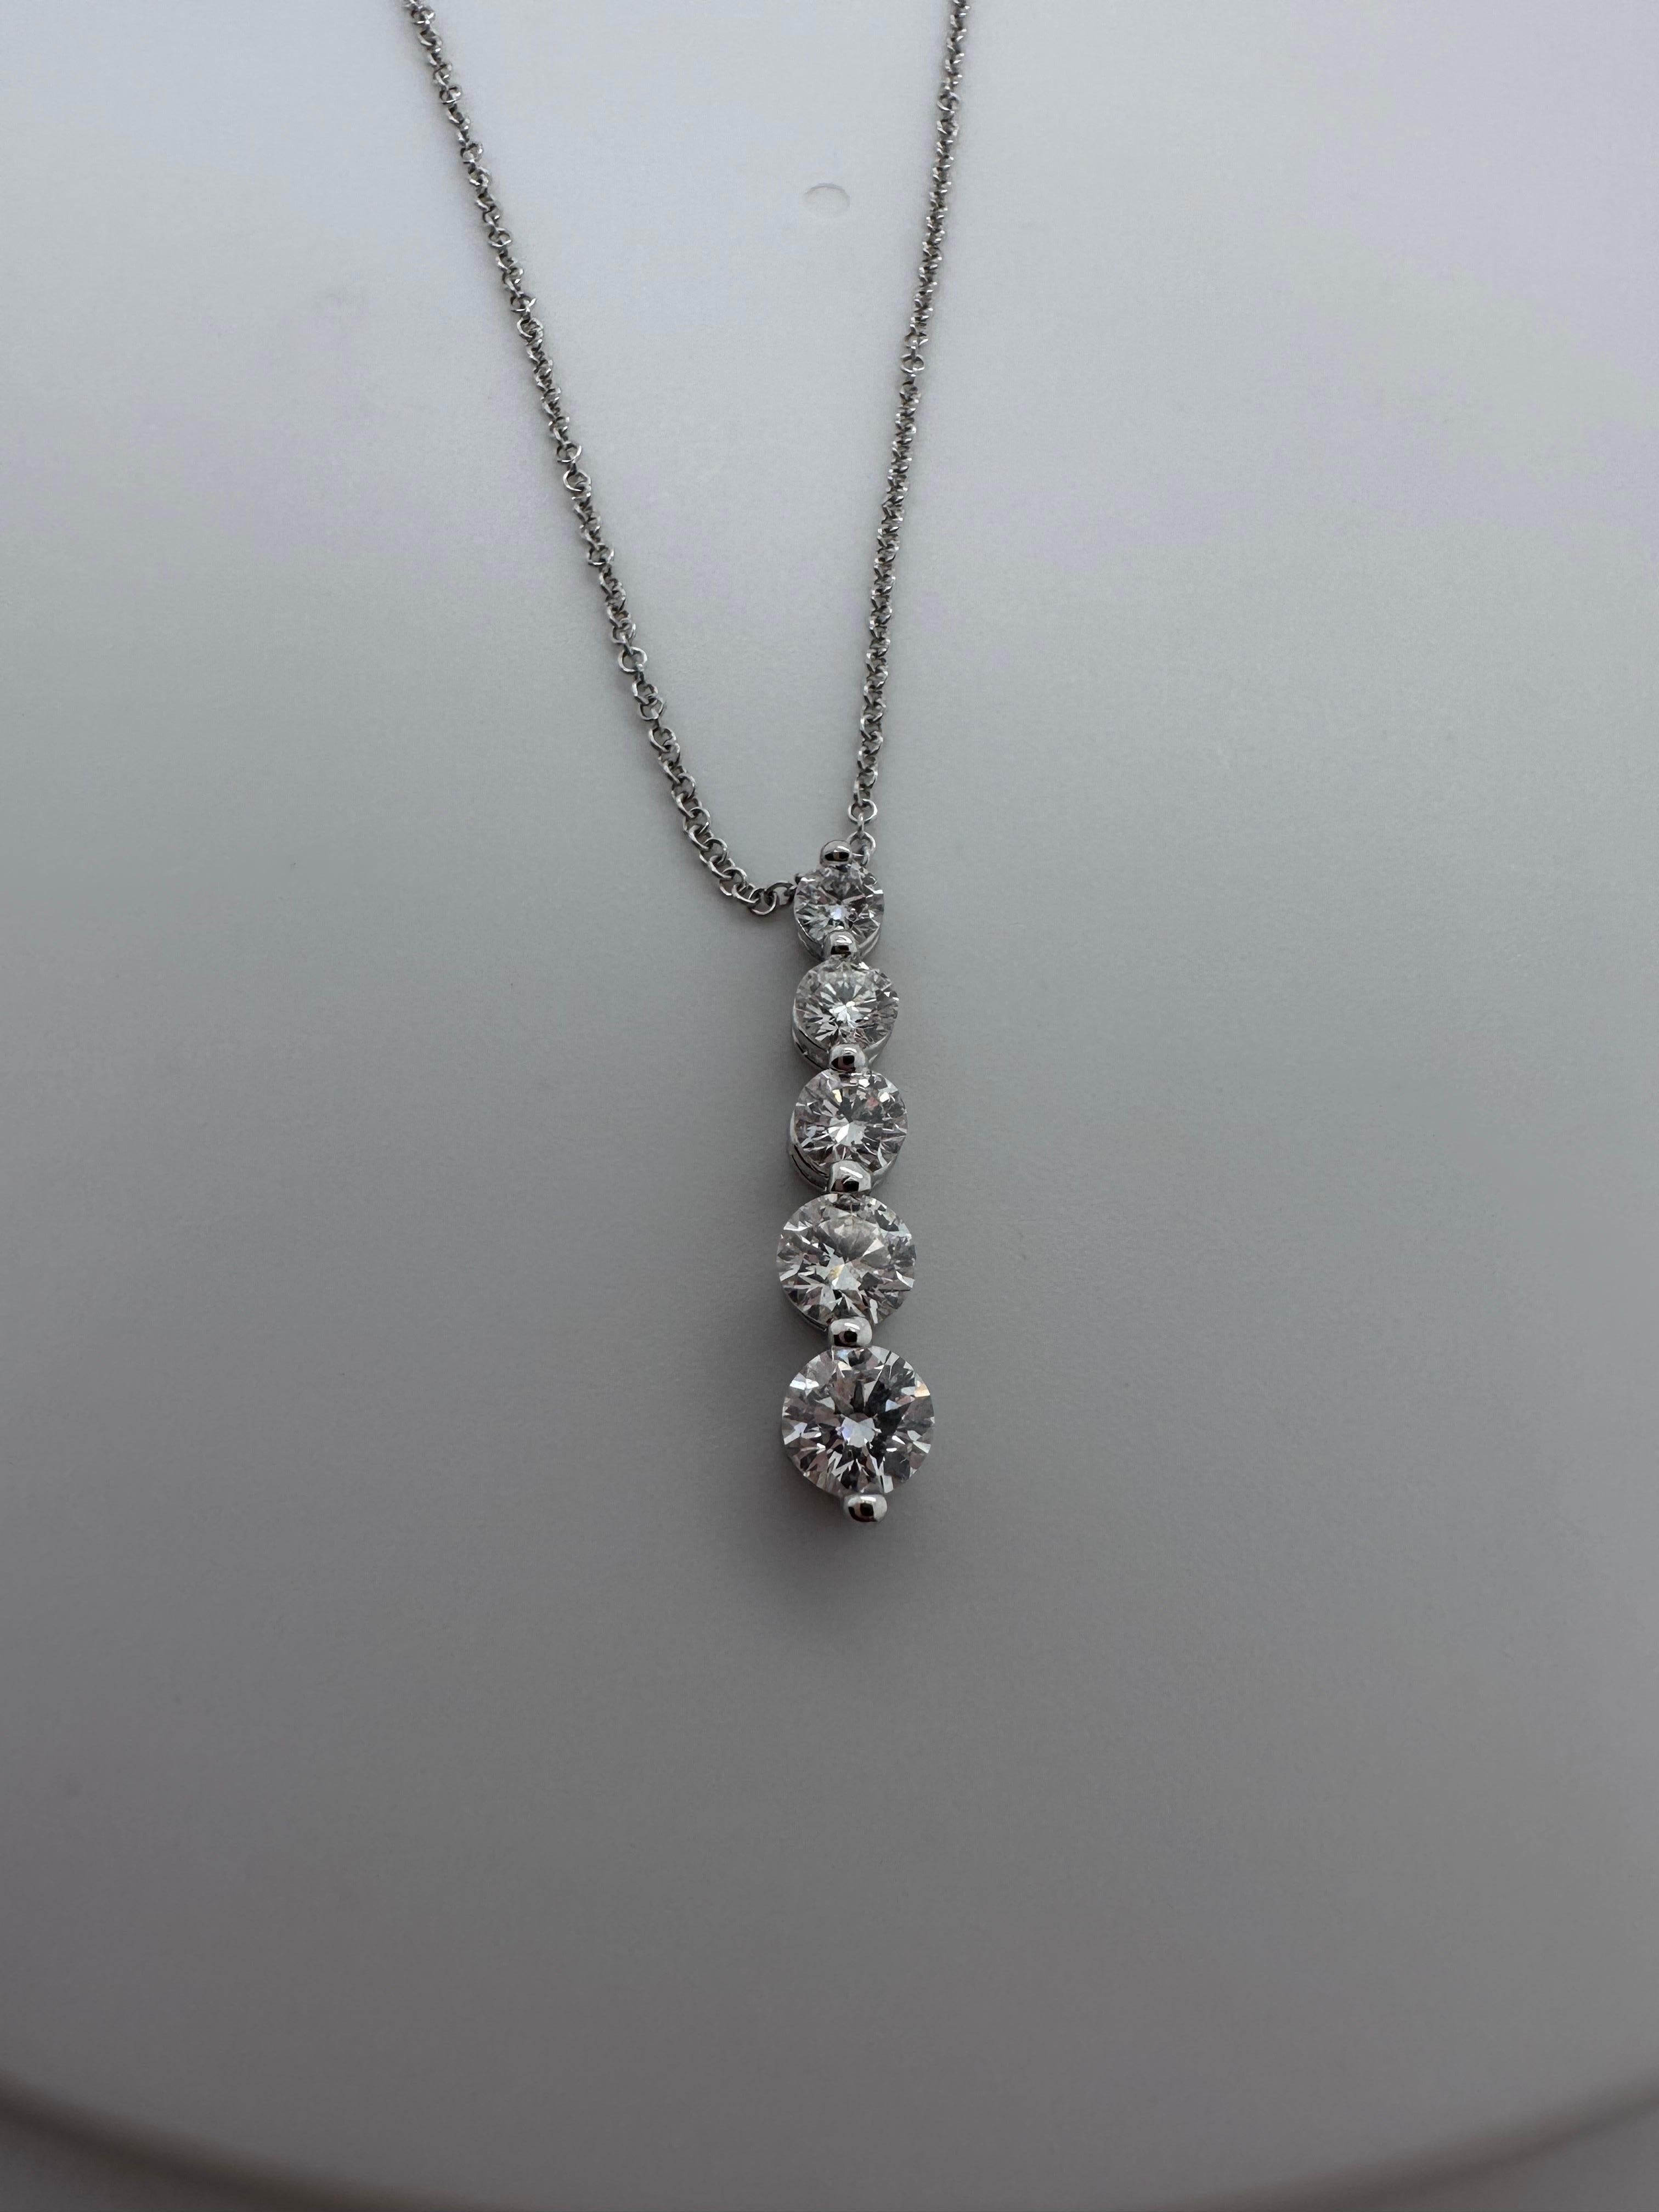 Journey diamond pendant necklace in 14KT white gold.
Its hard to find a beautiful journey pendant with the right balance in the stones! This is a beautiful graduating design with large diamonds that will last you for years to wear!
Metal Type: